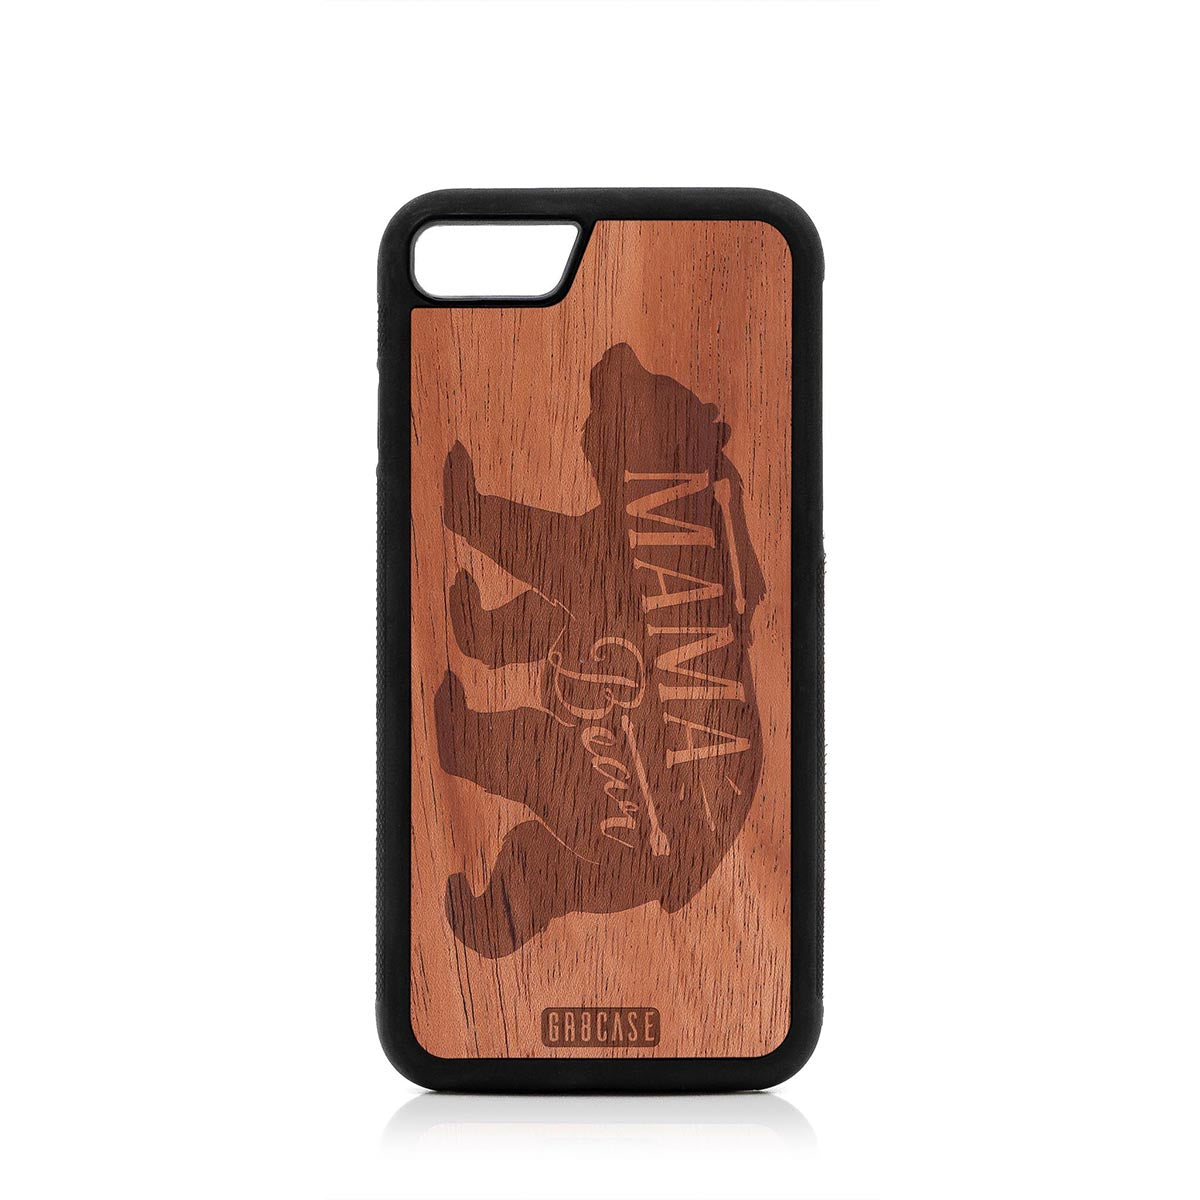 Mama Bear Design Wood Case For iPhone 7/8 by GR8CASE